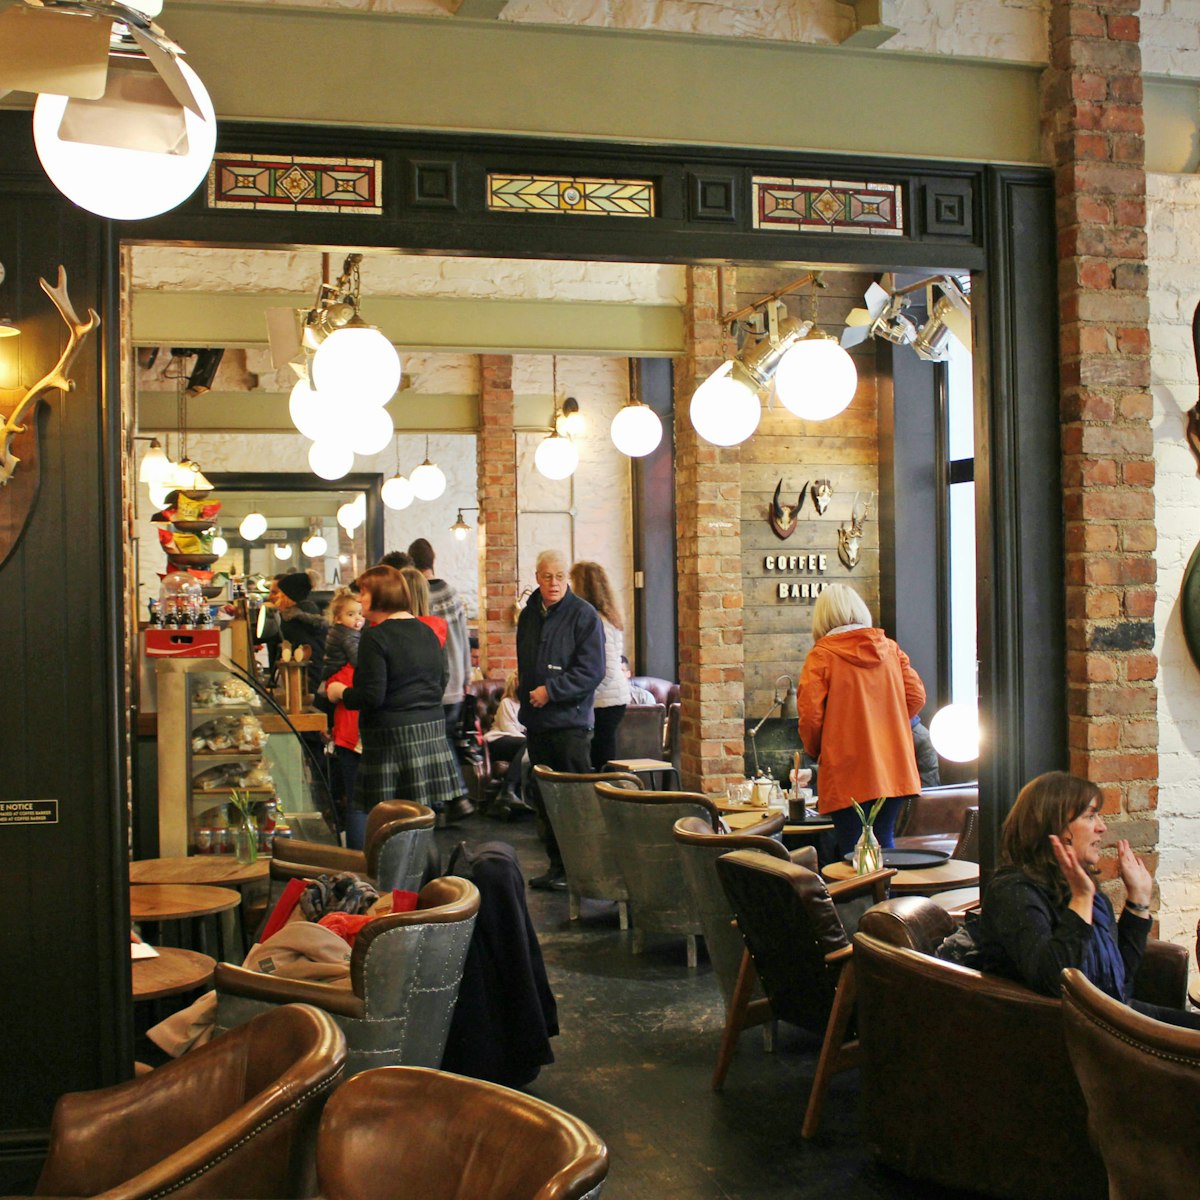 The warm, quirky interior of Coffee Barker